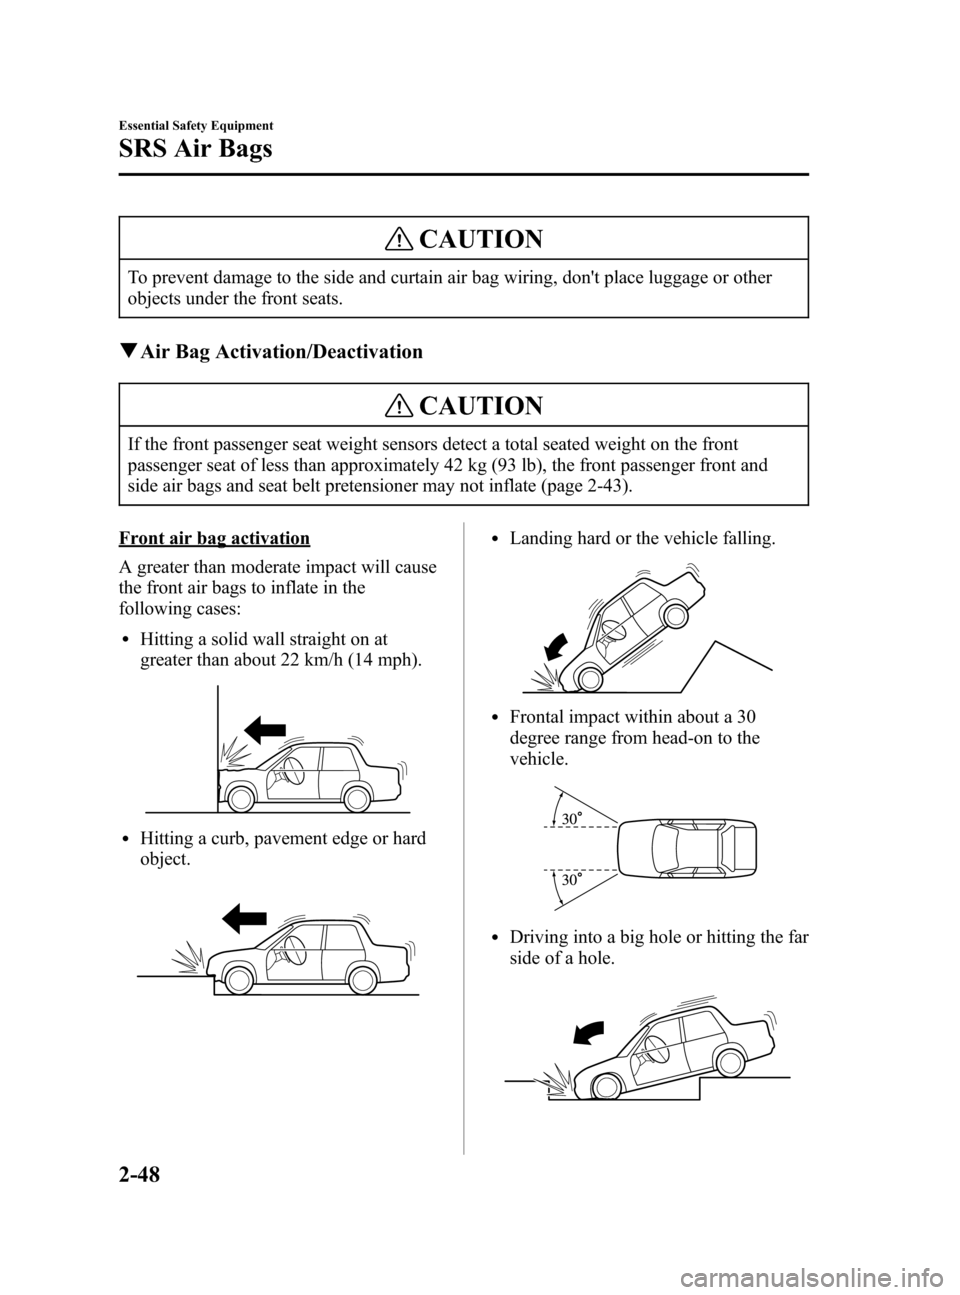 MAZDA MODEL 3 HATCHBACK 2005   (in English) Repair Manual Black plate (62,1)
CAUTION
To prevent damage to the side and curtain air bag wiring, dont place luggage or other
objects under the front seats.
qAir Bag Activation/Deactivation
CAUTION
If the front p